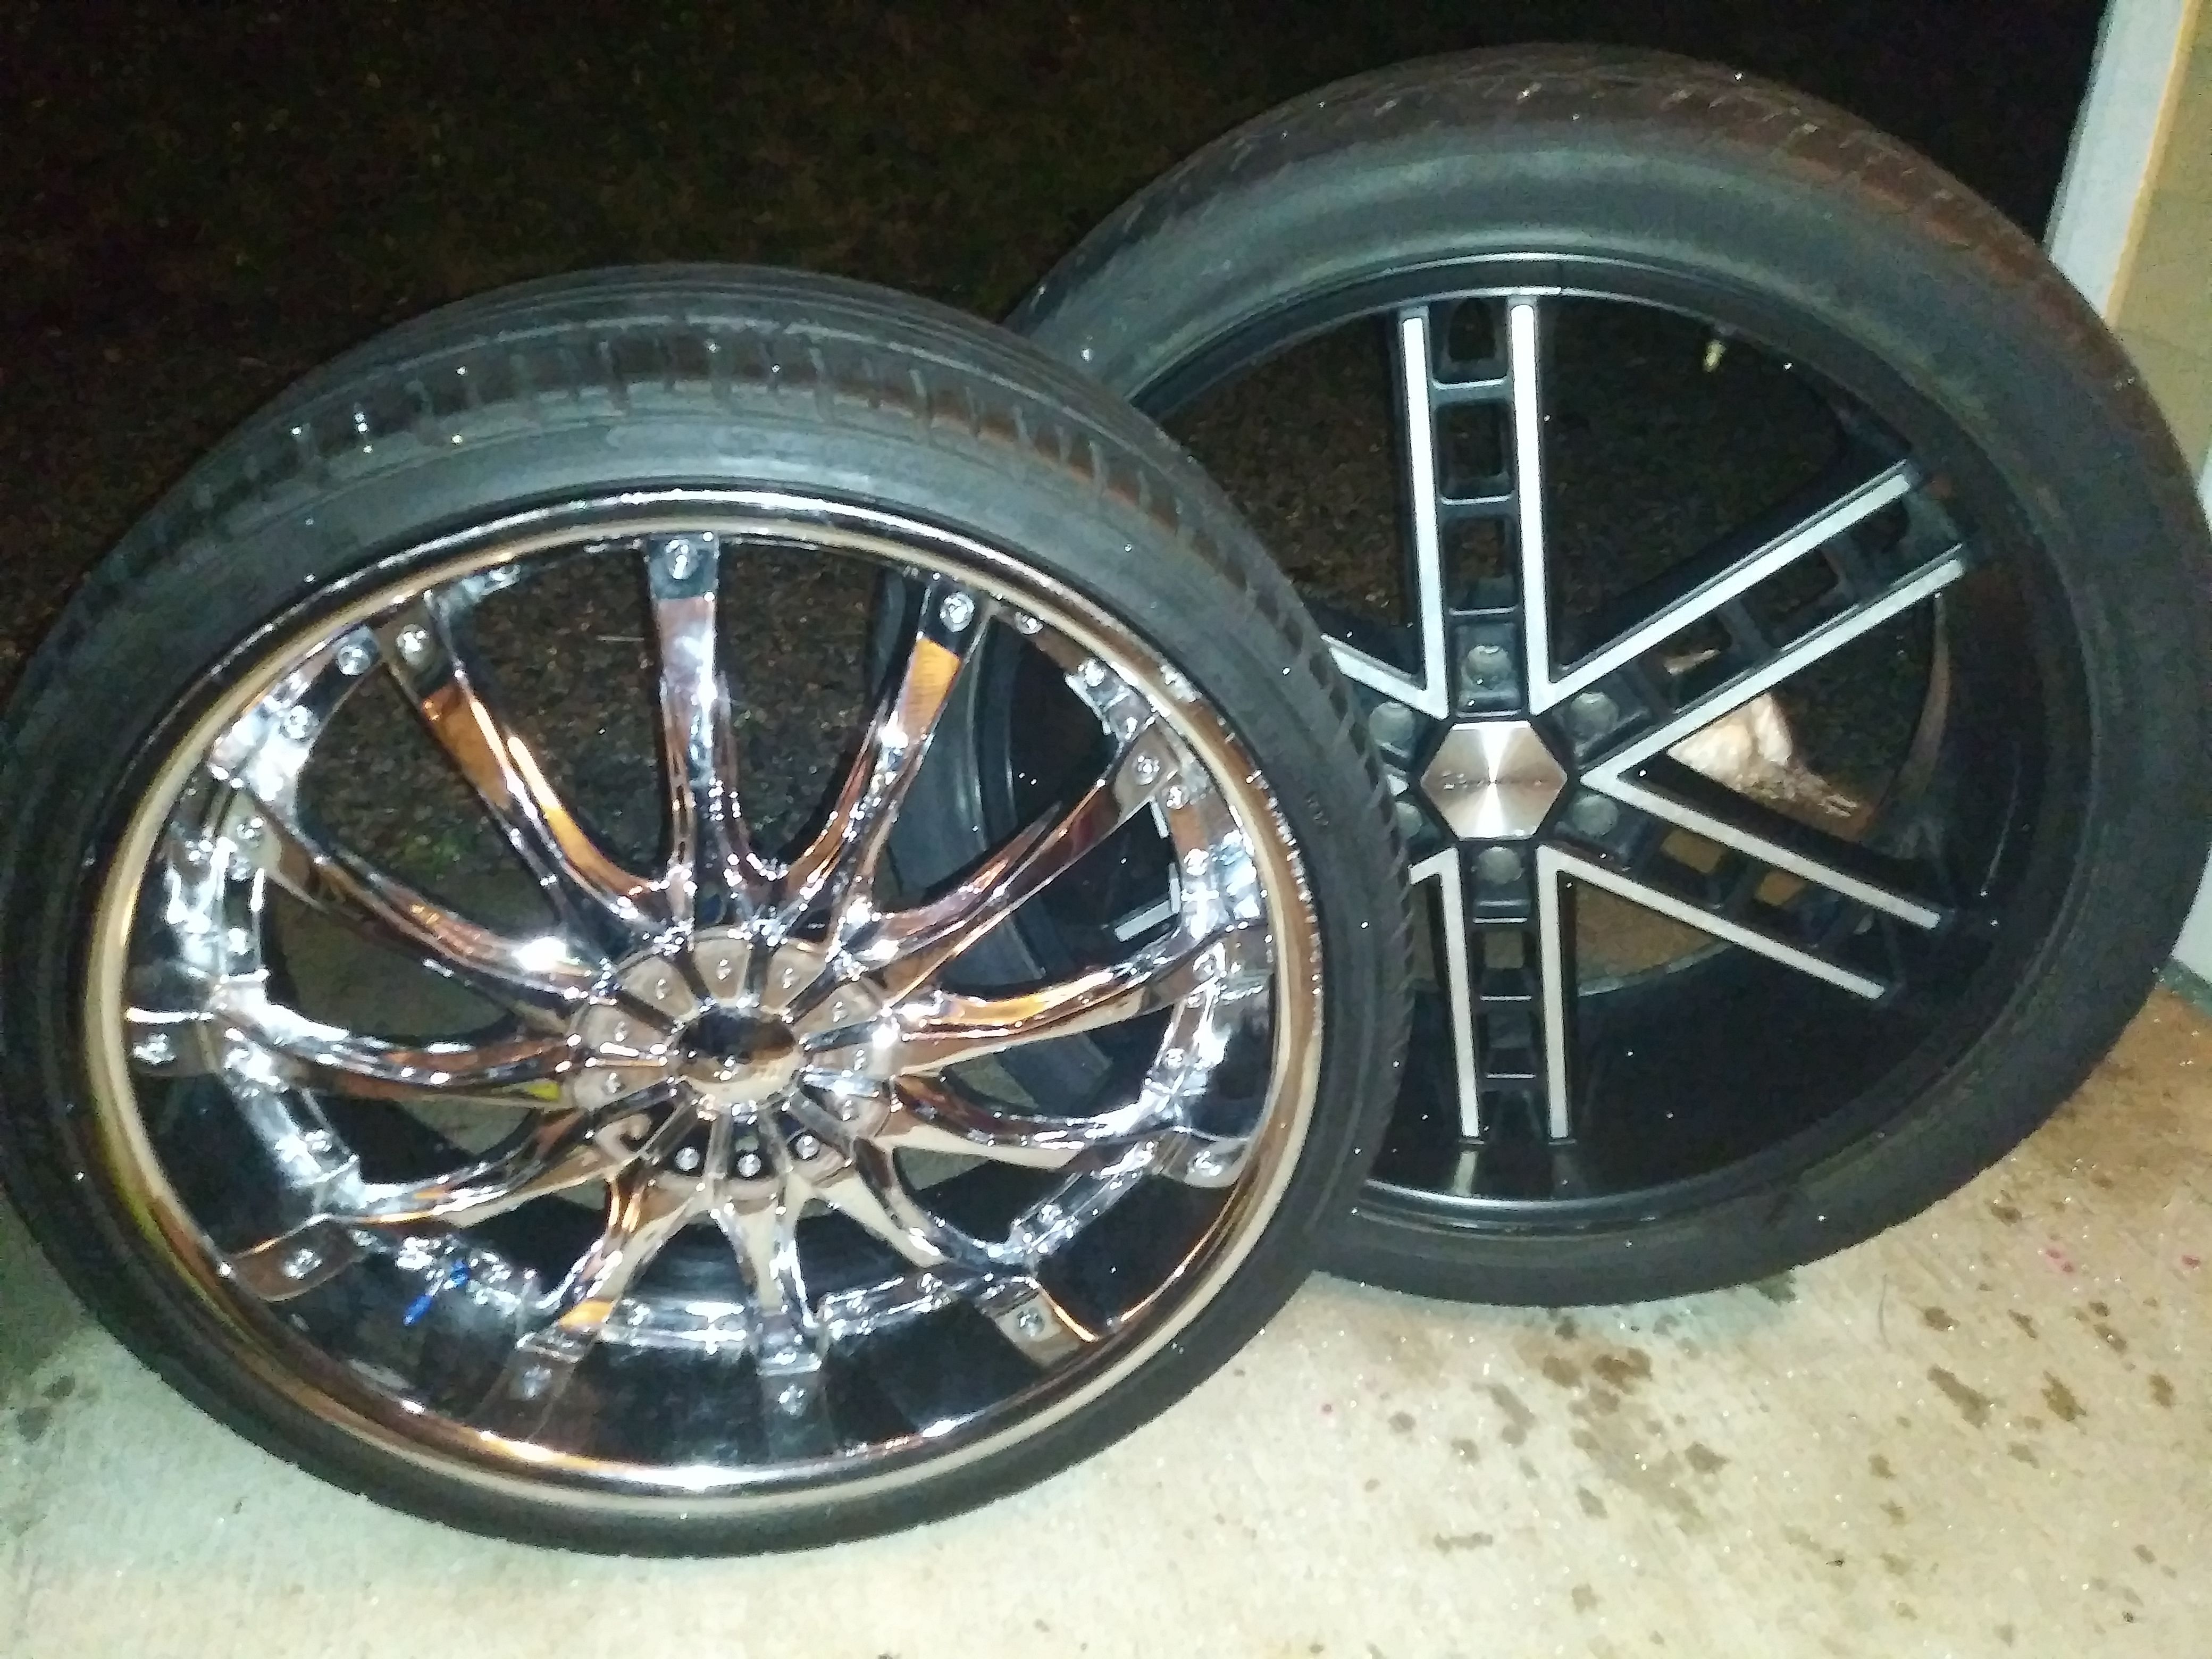 22's or 24's